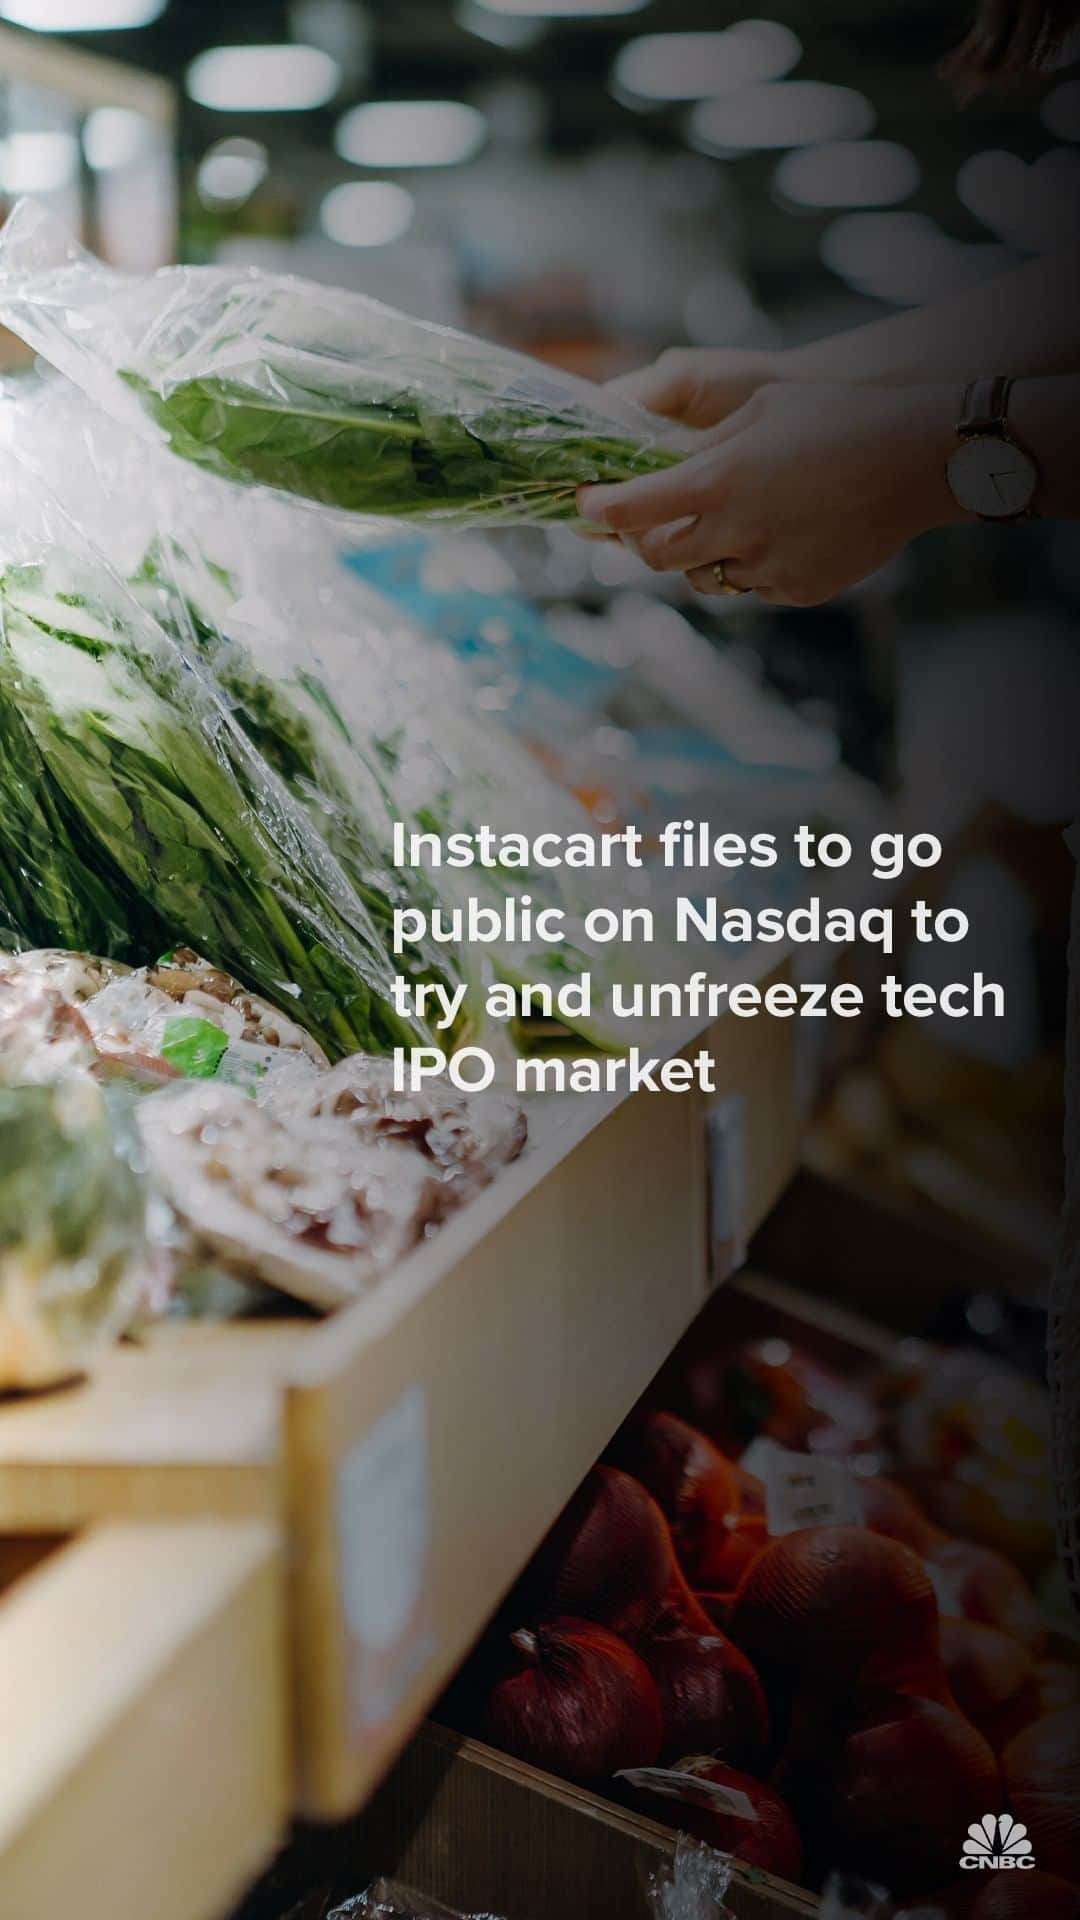 CNBCのインスタグラム：「Instacart, the grocery delivery company that slashed its valuation during last year’s market slide, filed its paperwork to go public on Friday in what’s poised to be the first significant venture-backed tech IPO since December 2021.  The stock will be listed on the Nasdaq under the ticker symbol “CART.”  Details on how Instacart will try and crack open the IPO market at the link in bio.」